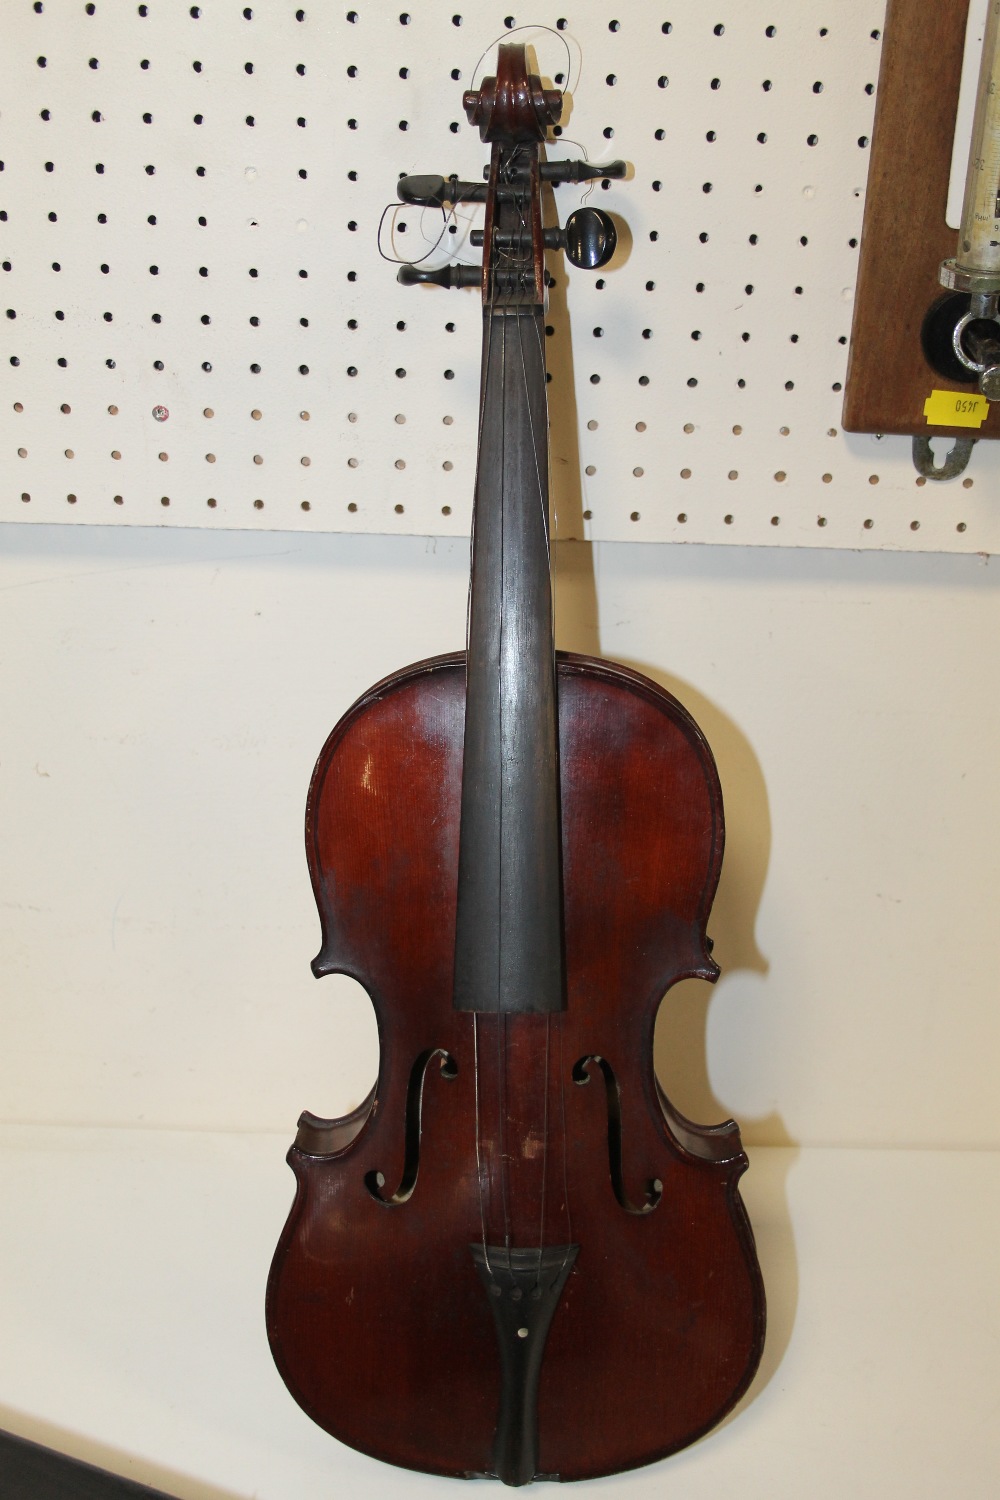 A CASED VINTAGE VIOLIN WITH TWO PIECE BACK - INTERIOR LABEL THE MAIDSTONE, BACK L 34 CM, TOGETHER - Image 2 of 3